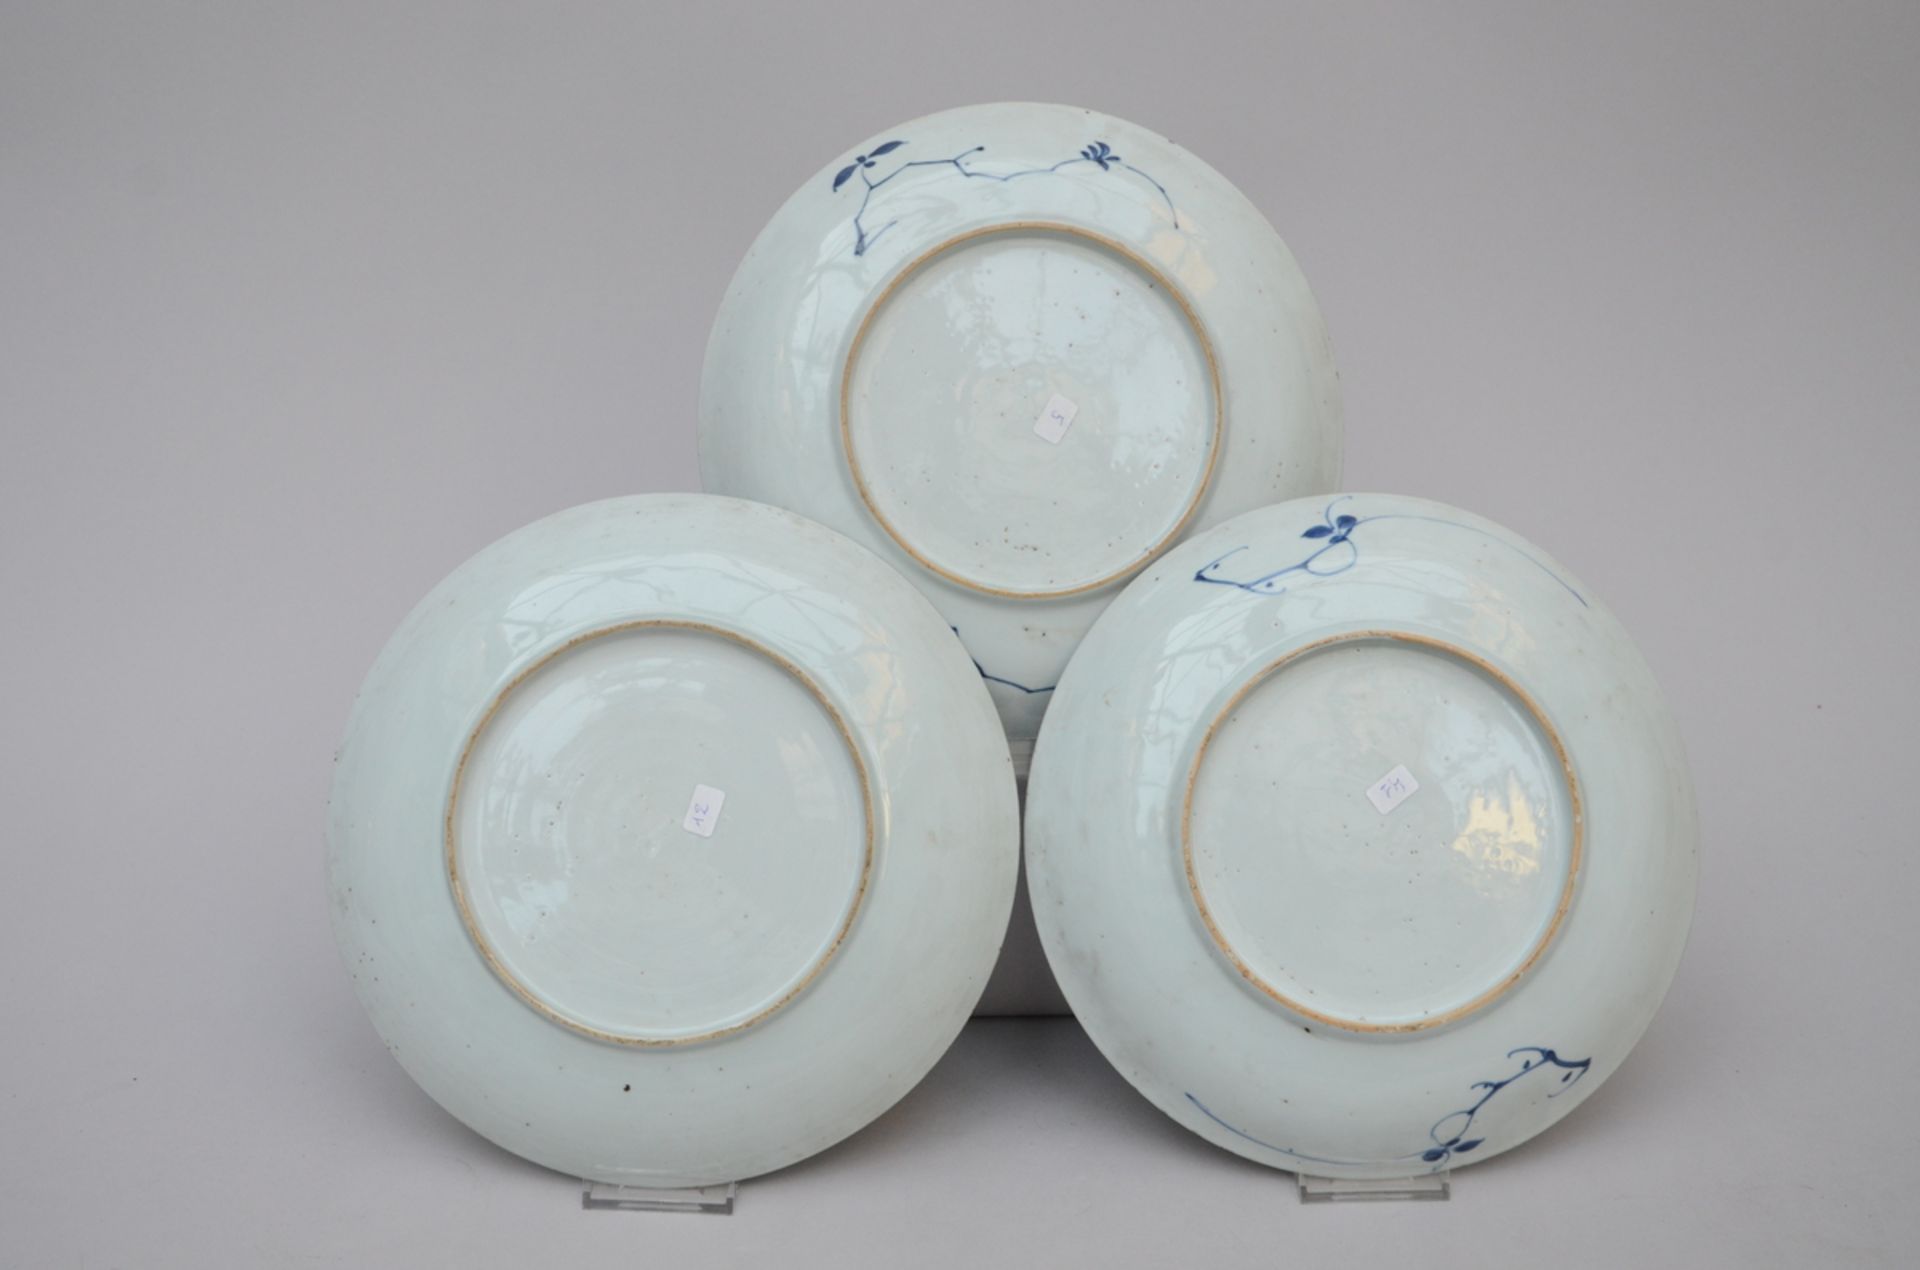 Three dishes in Chinese blue and white porcelain, 18th century (dia 28 cm) - Image 2 of 2